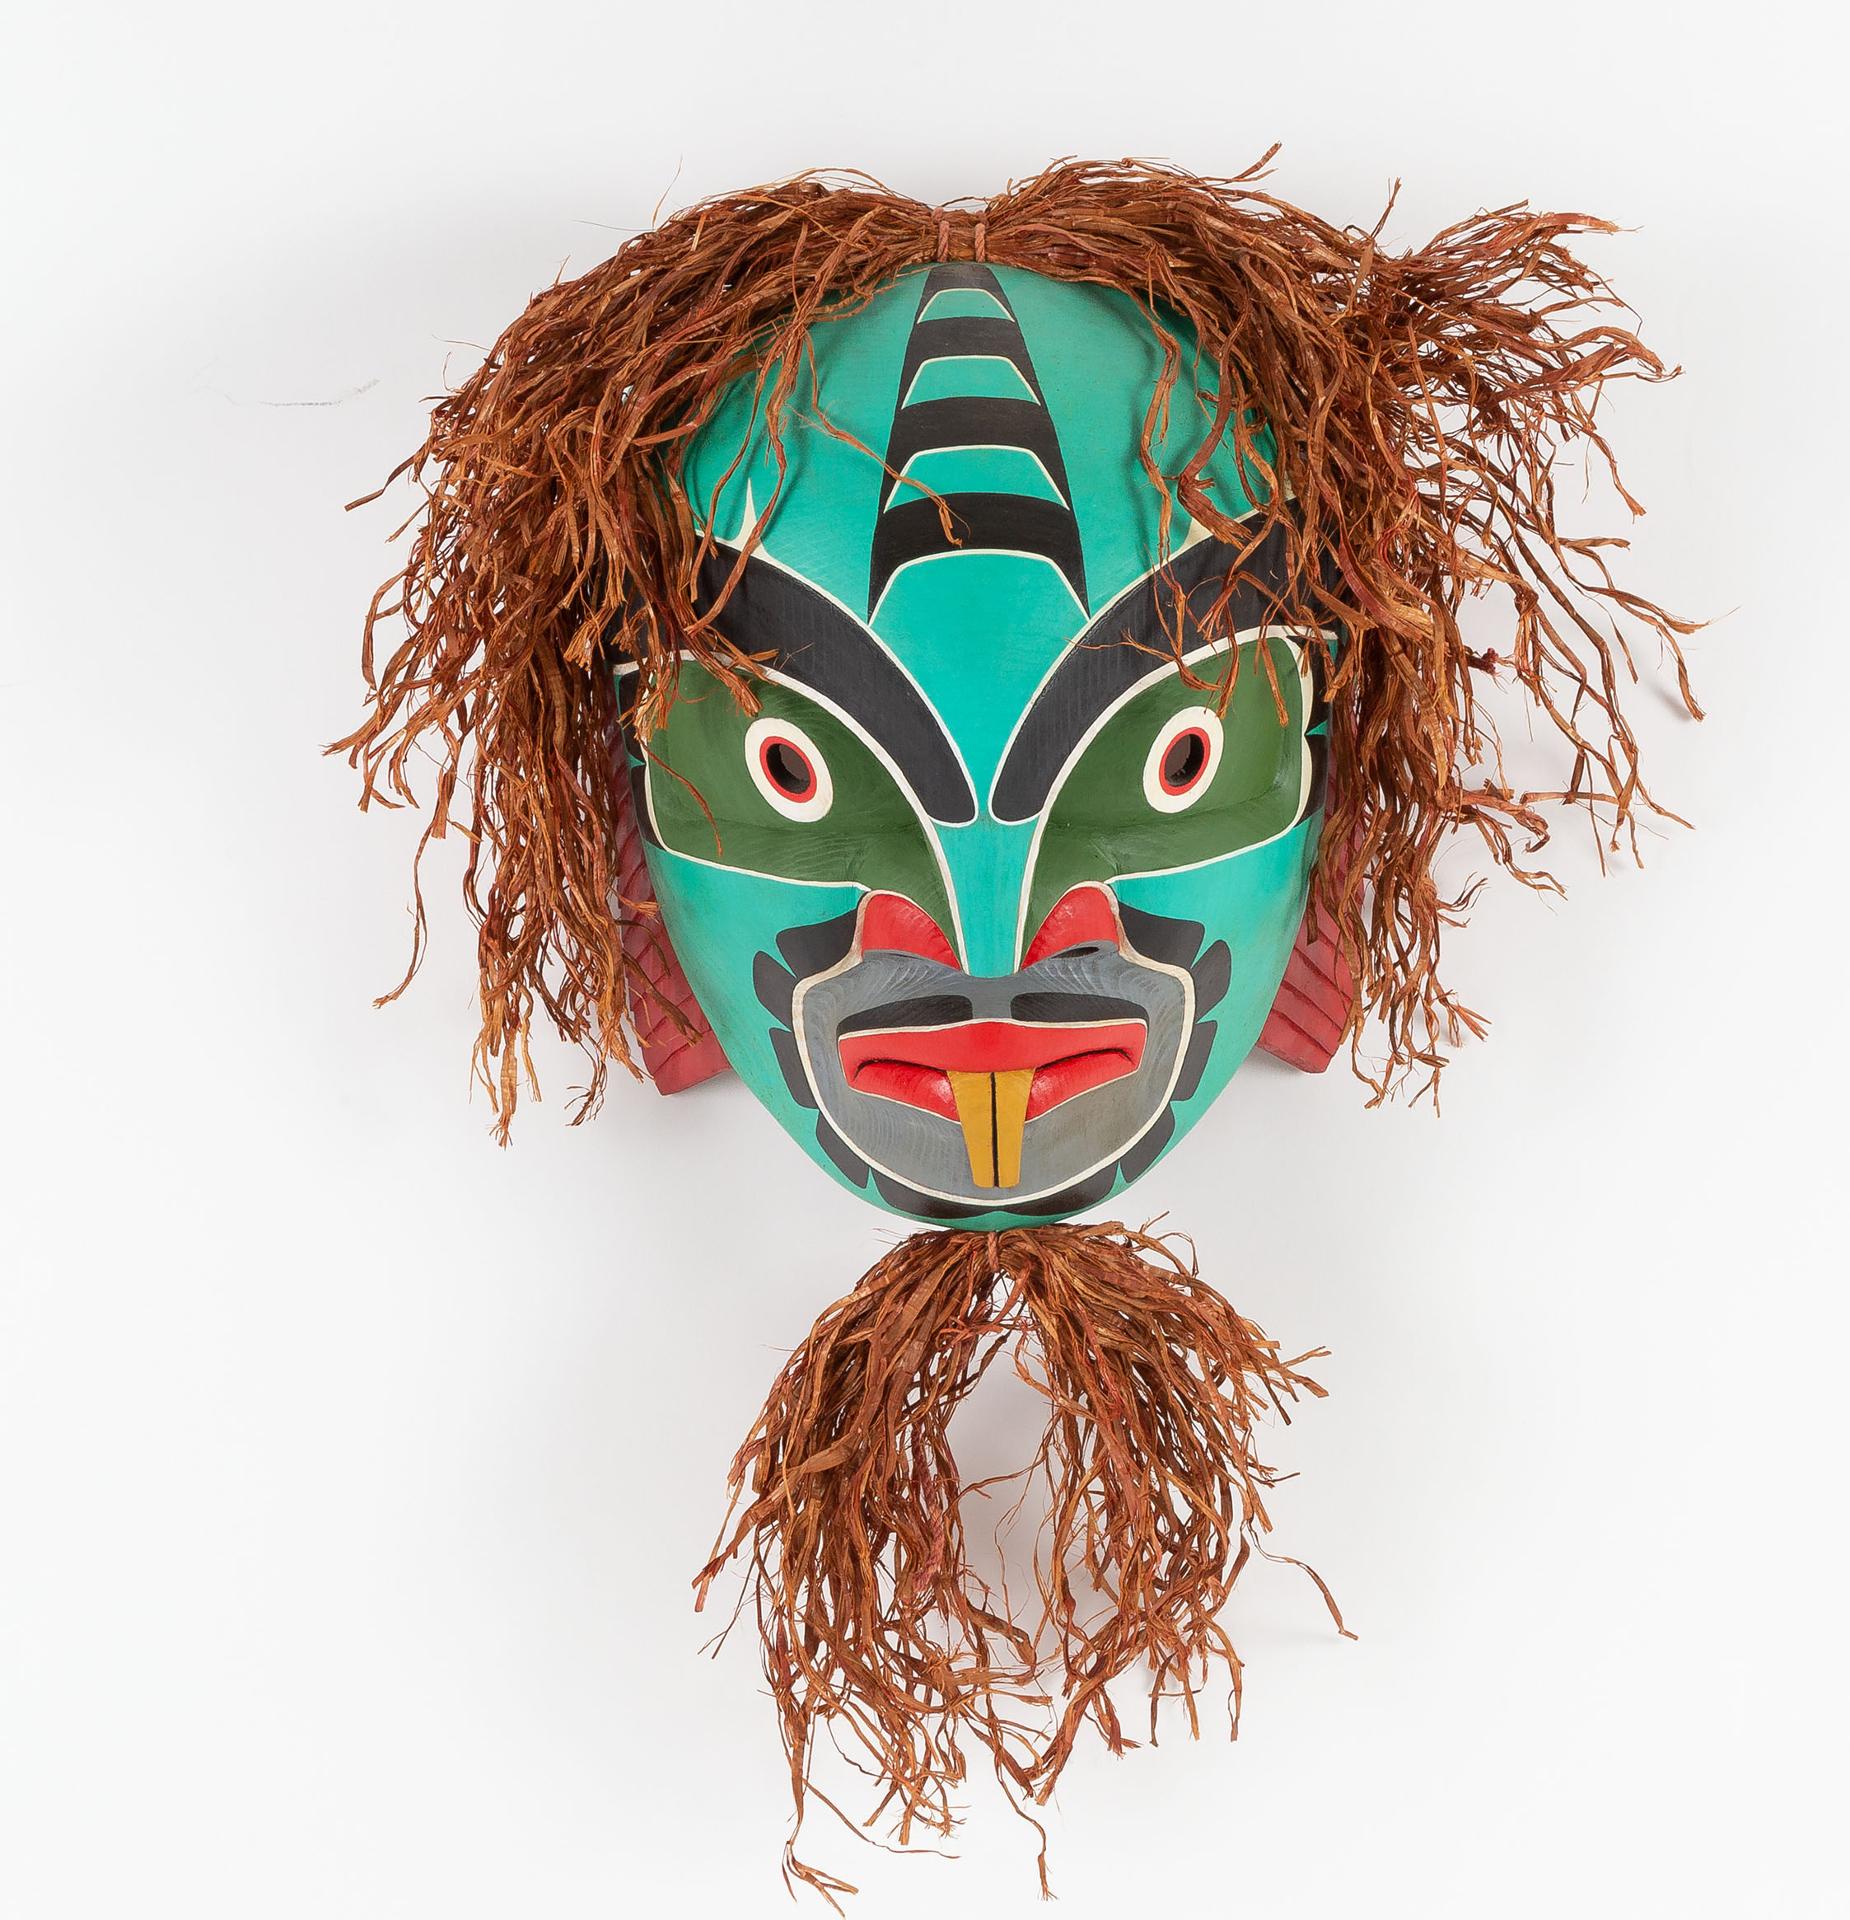 Russell Smith (1950-2011) - Pugwis Mask